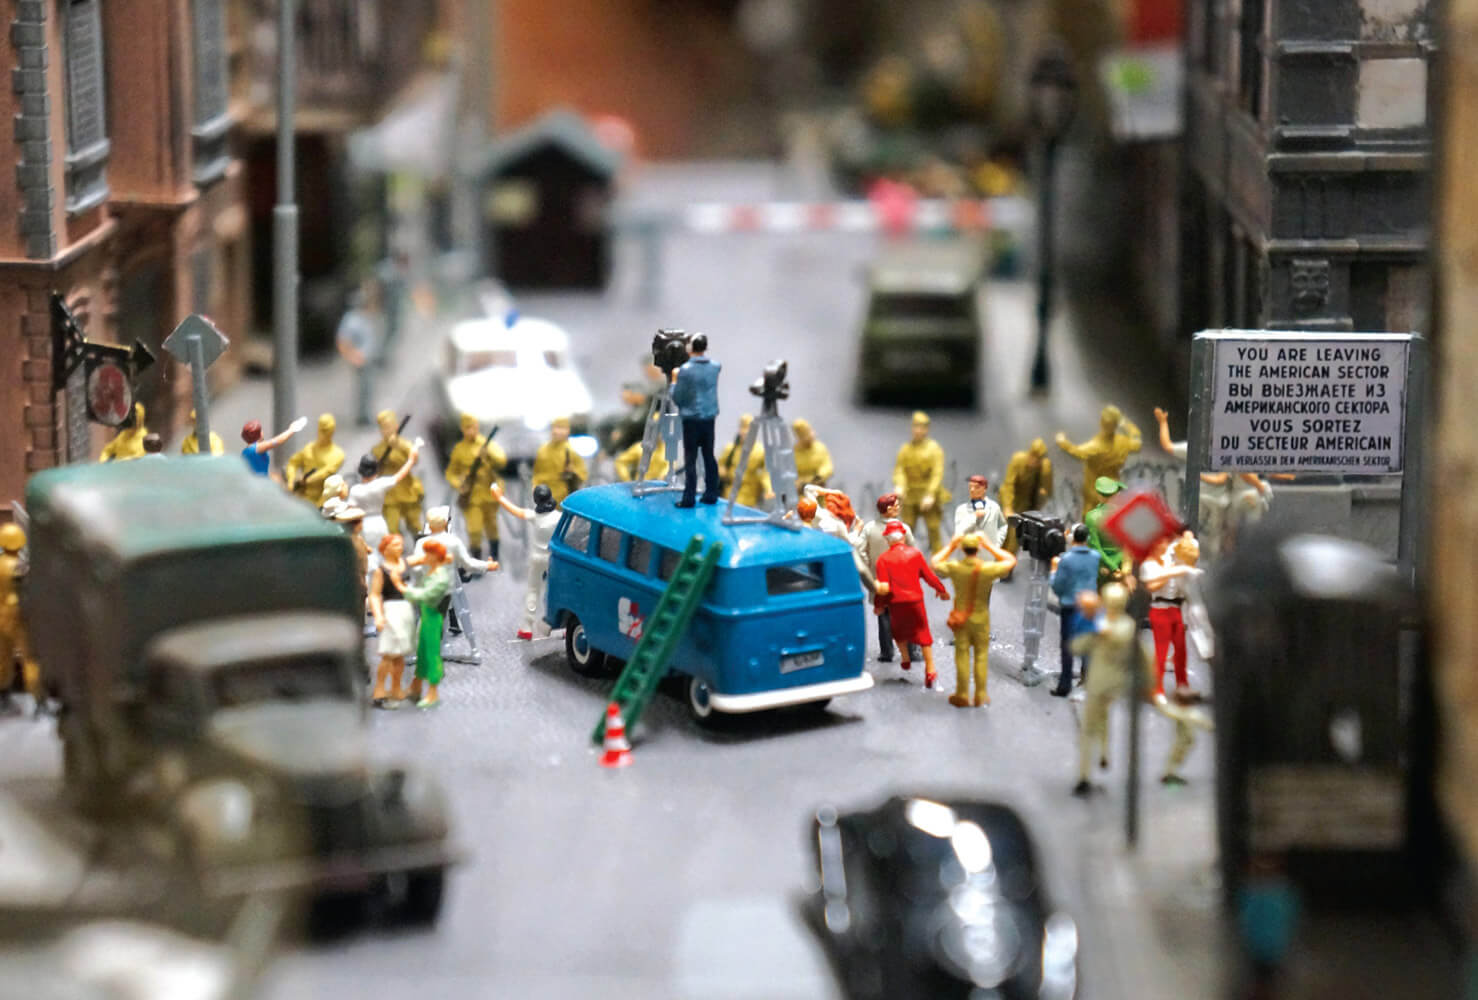 The Miniatur Wunderland’s representation of a line of East German soldiers preventing a crowd from entering the American Sector in divided Cold War Berlin.